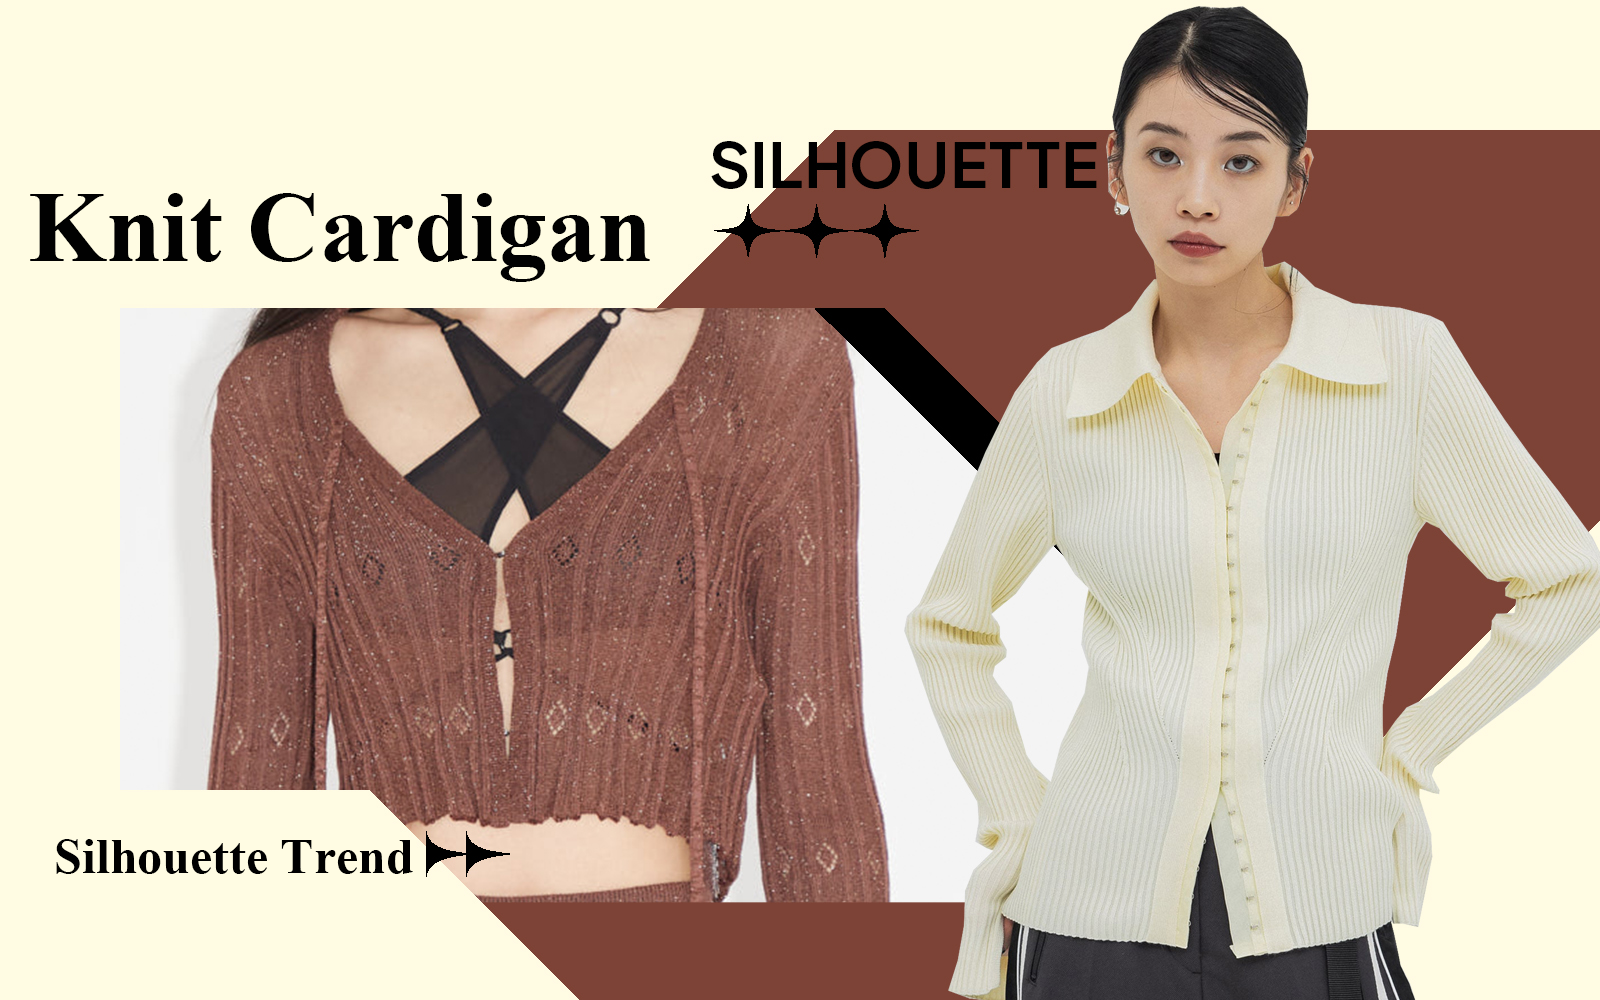 S/S 2025 Silhouette Trend for Women's Knit Cardigan